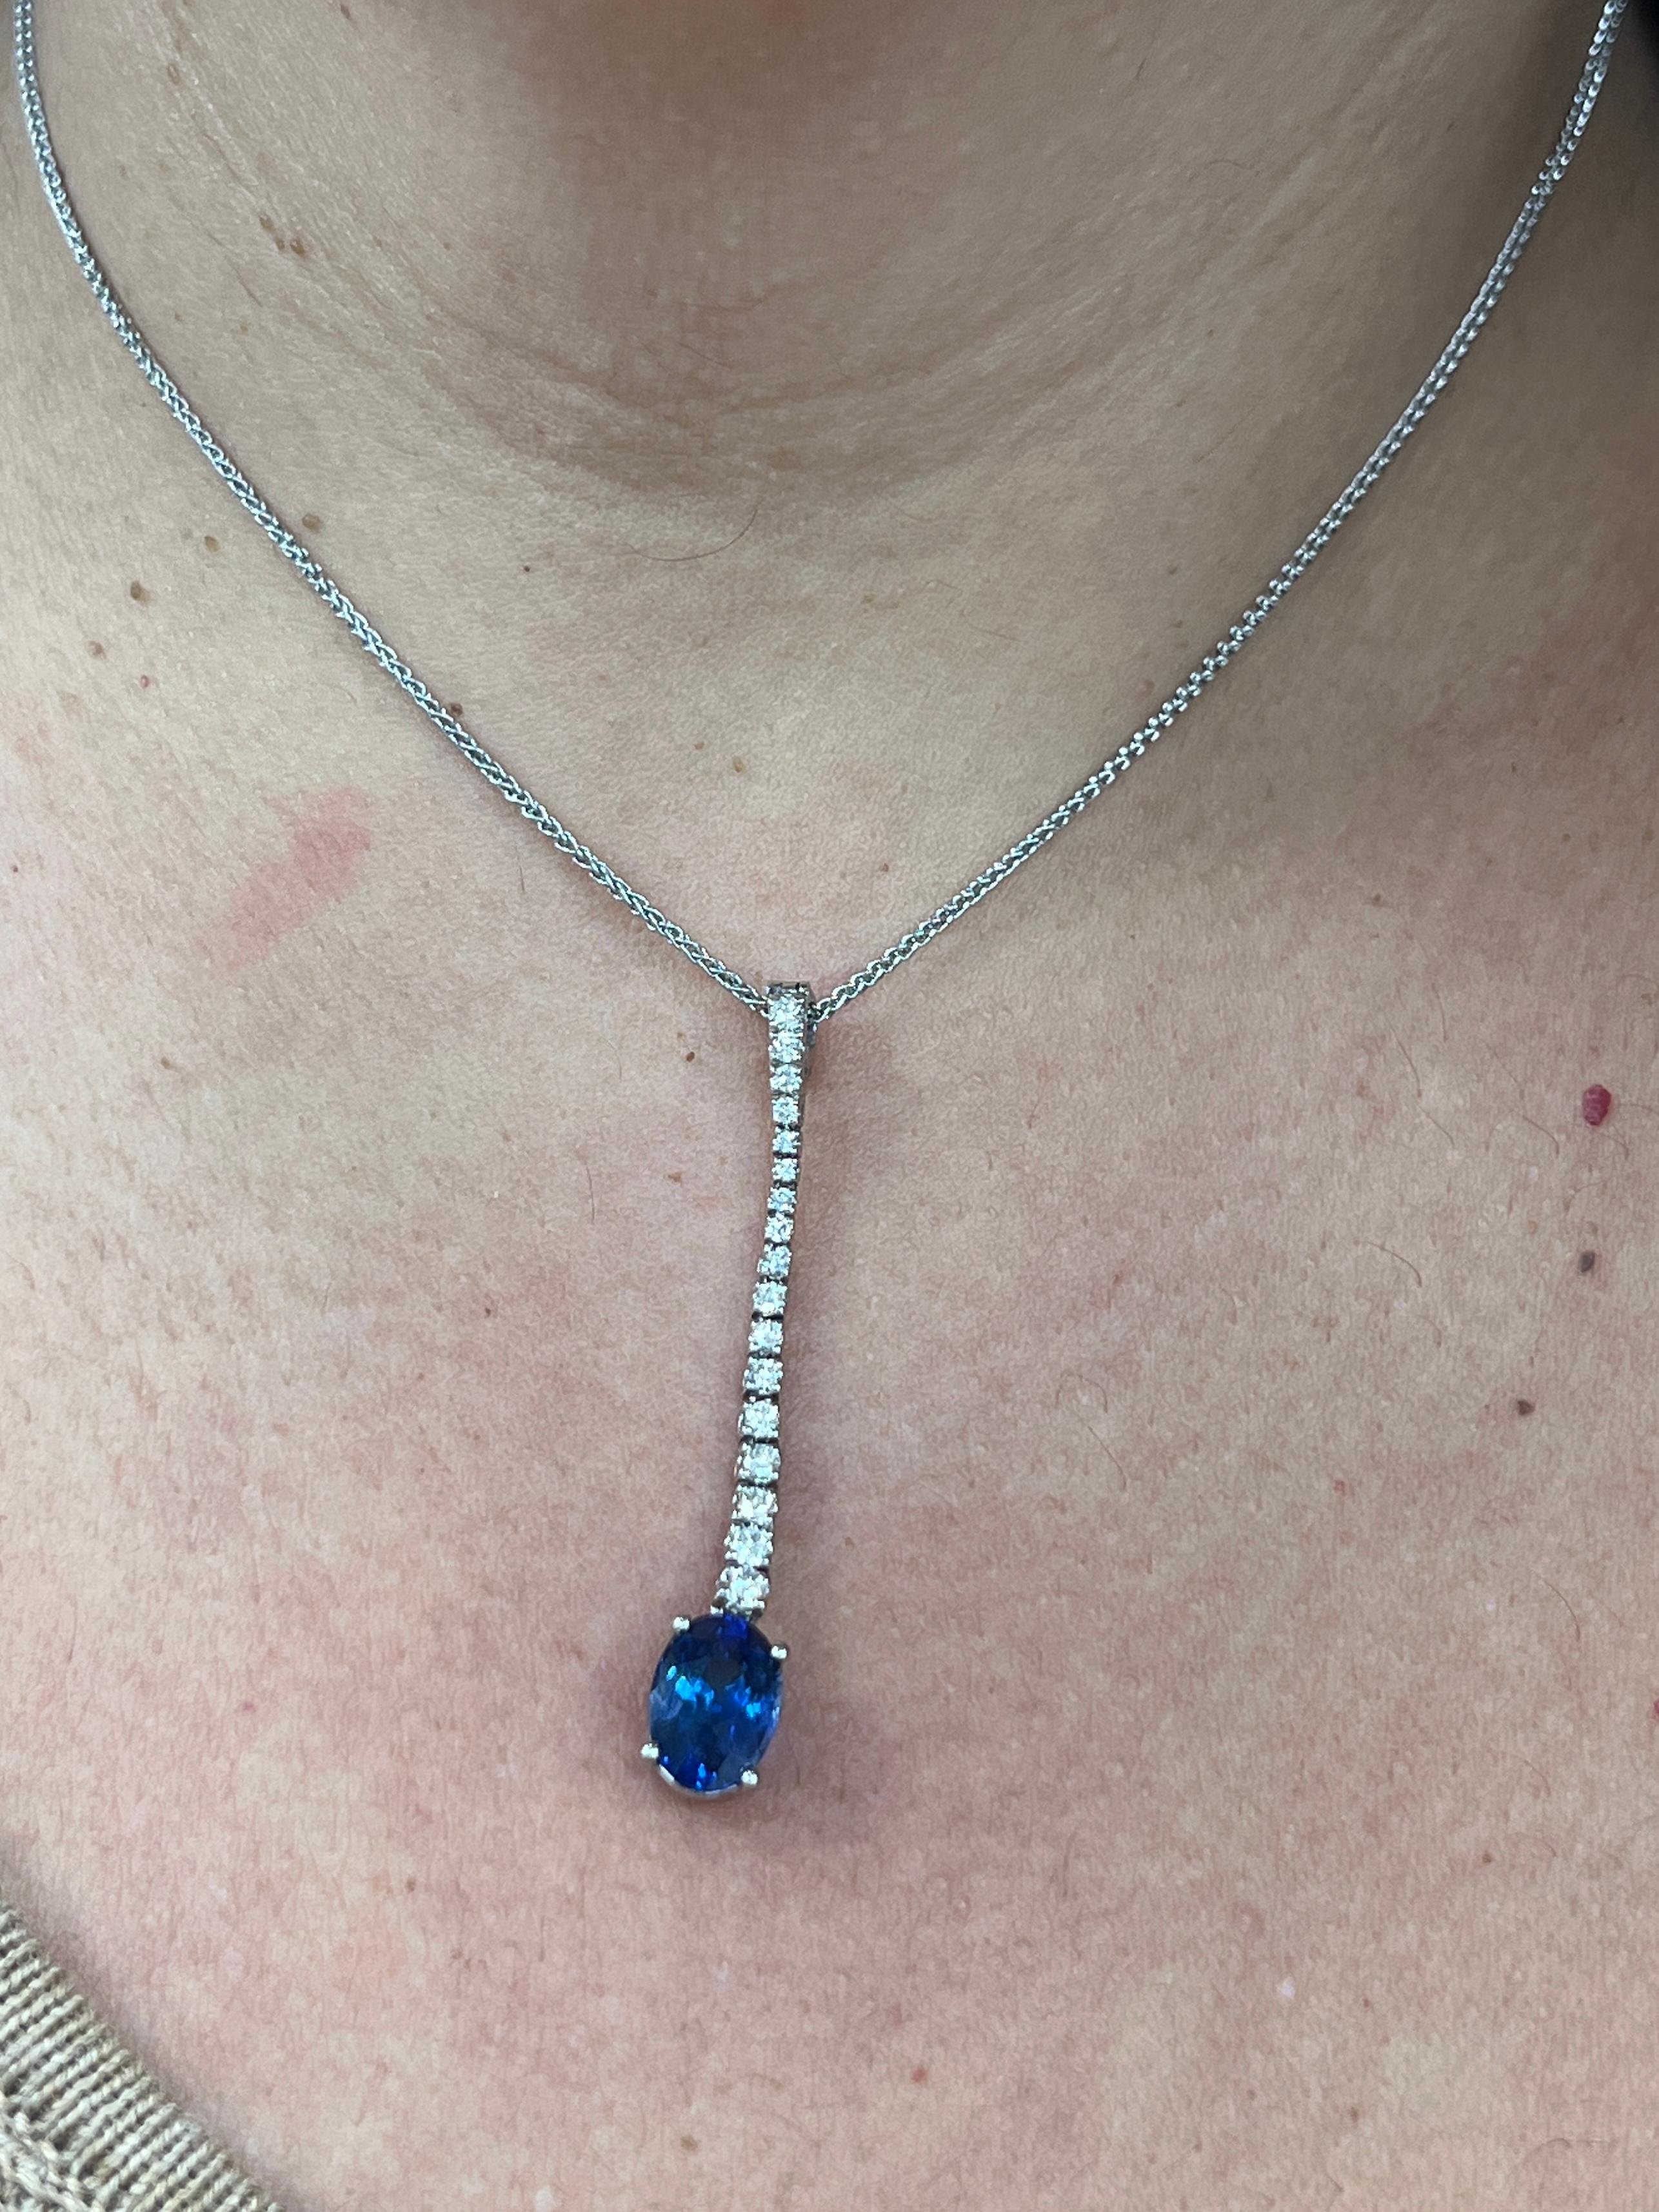 Brilliant Cut Oval Shaped Sapphire and Diamond Necklace For Sale